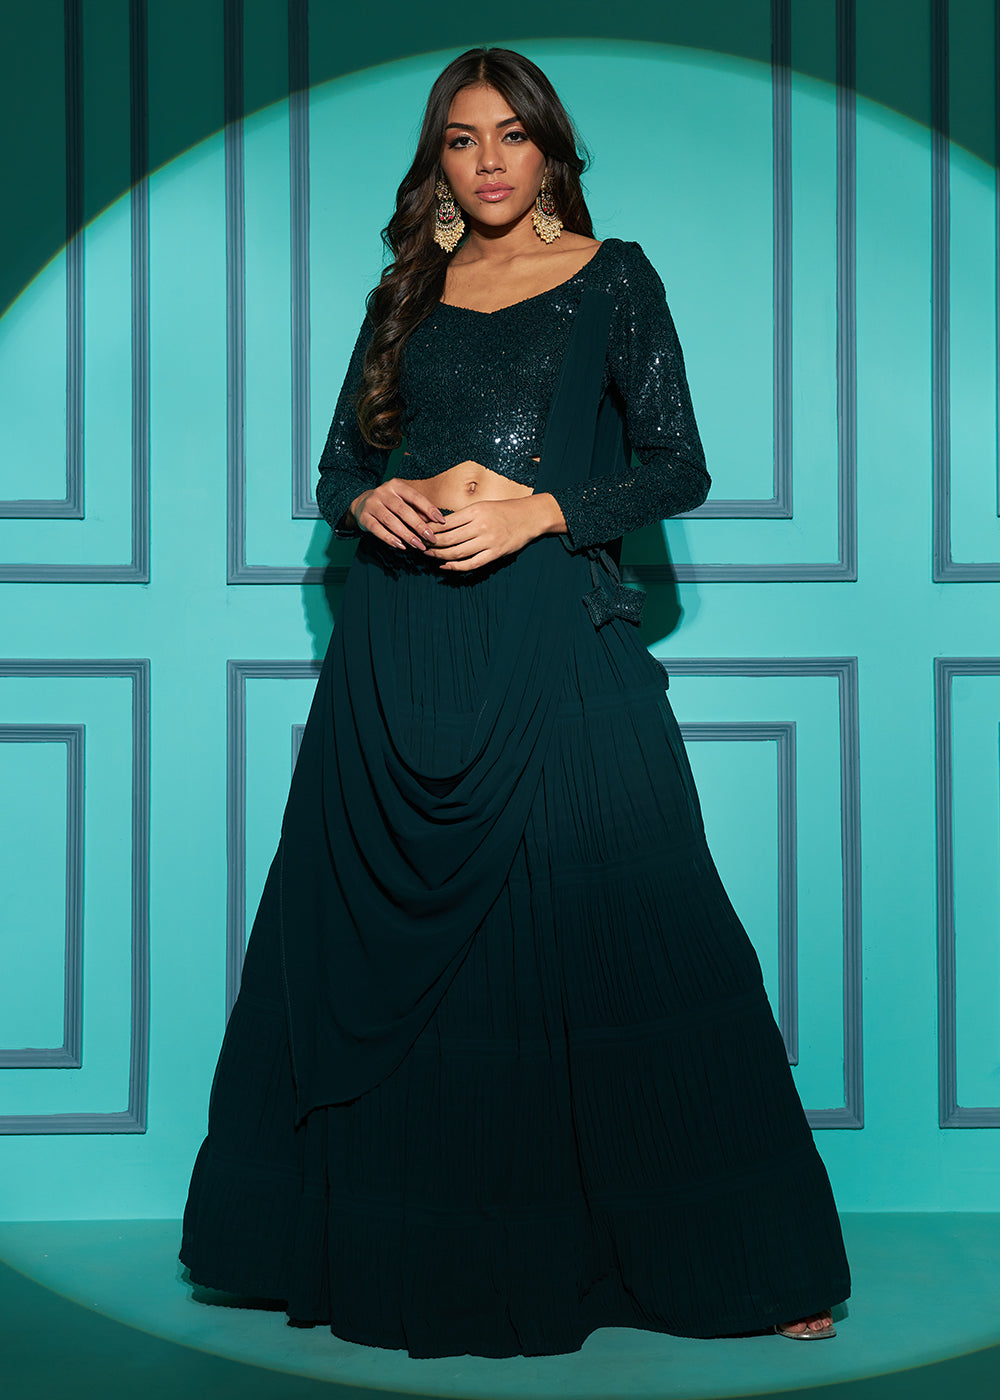 Buy Now Exquisite Dark Green Georgette Wedding Party Lehenga Choli Online in USA, UK, Canada & Worldwide at Empress Clothing. 